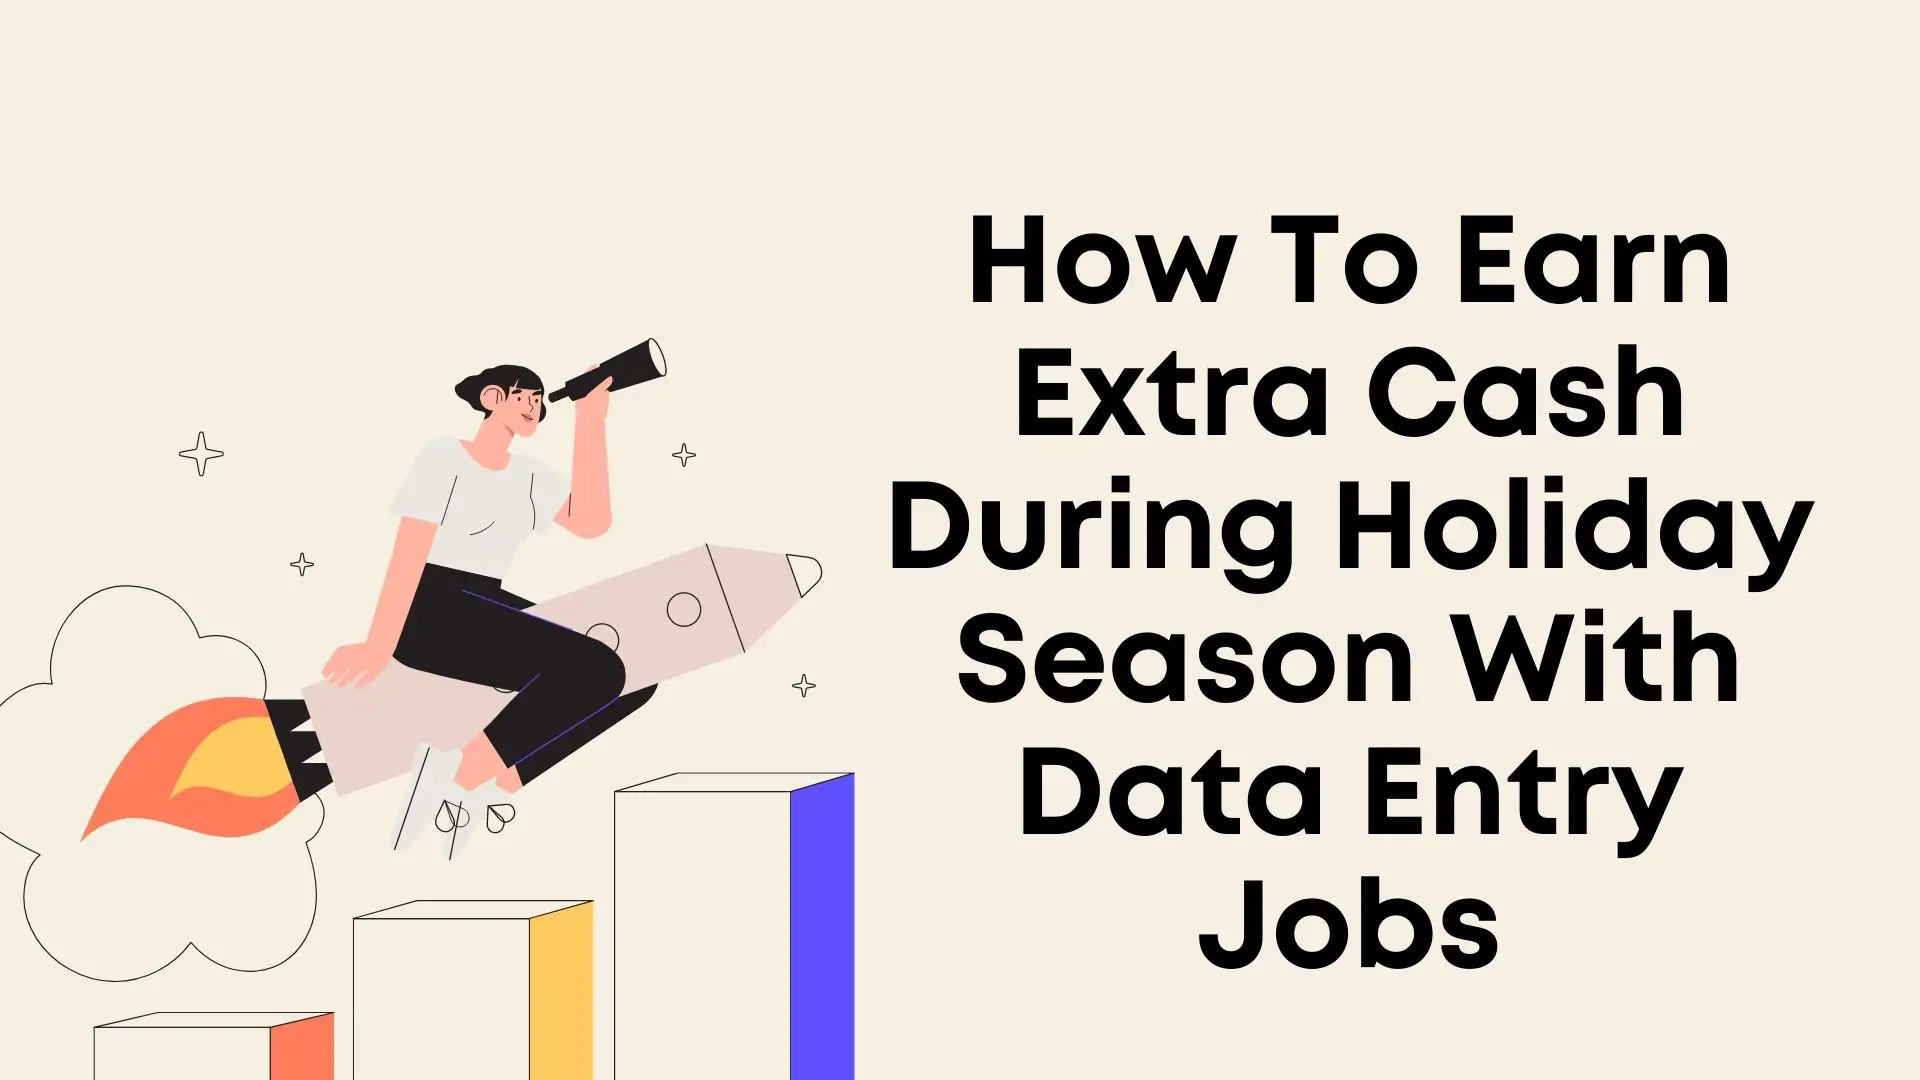 How To Earn Extra Cash During Holiday Season With Data Entry Jobs